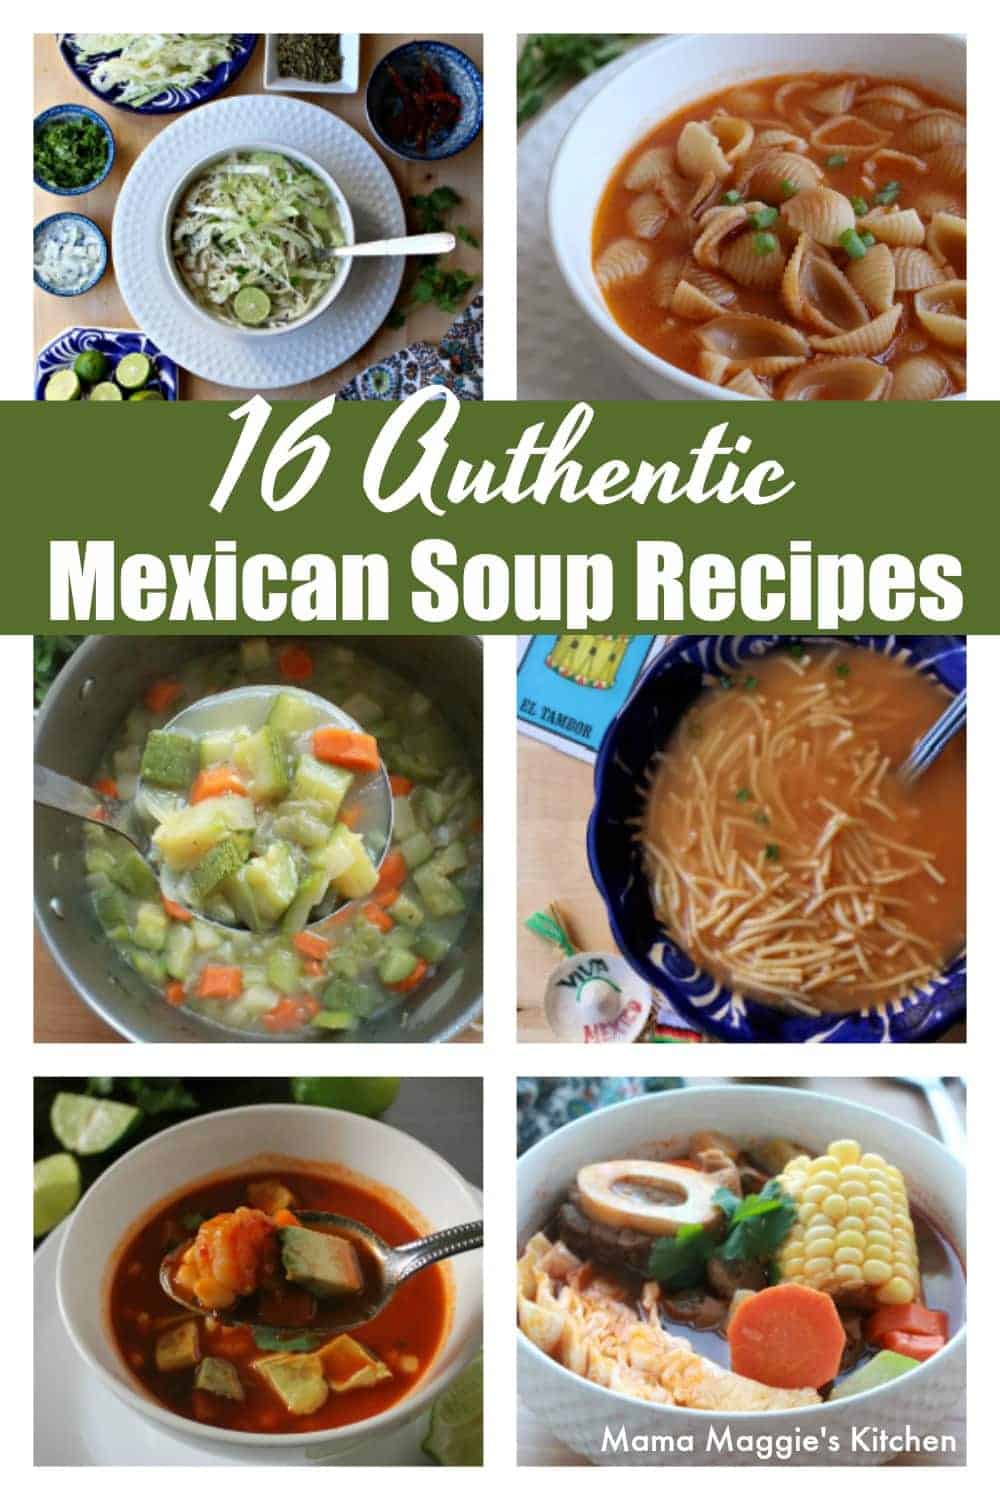 16 authentic Mexican soup recipes to warm you up this winter. These time-tested and traditional dishes add variety and flavor to any kitchen. By Mama Maggie's Kitchen